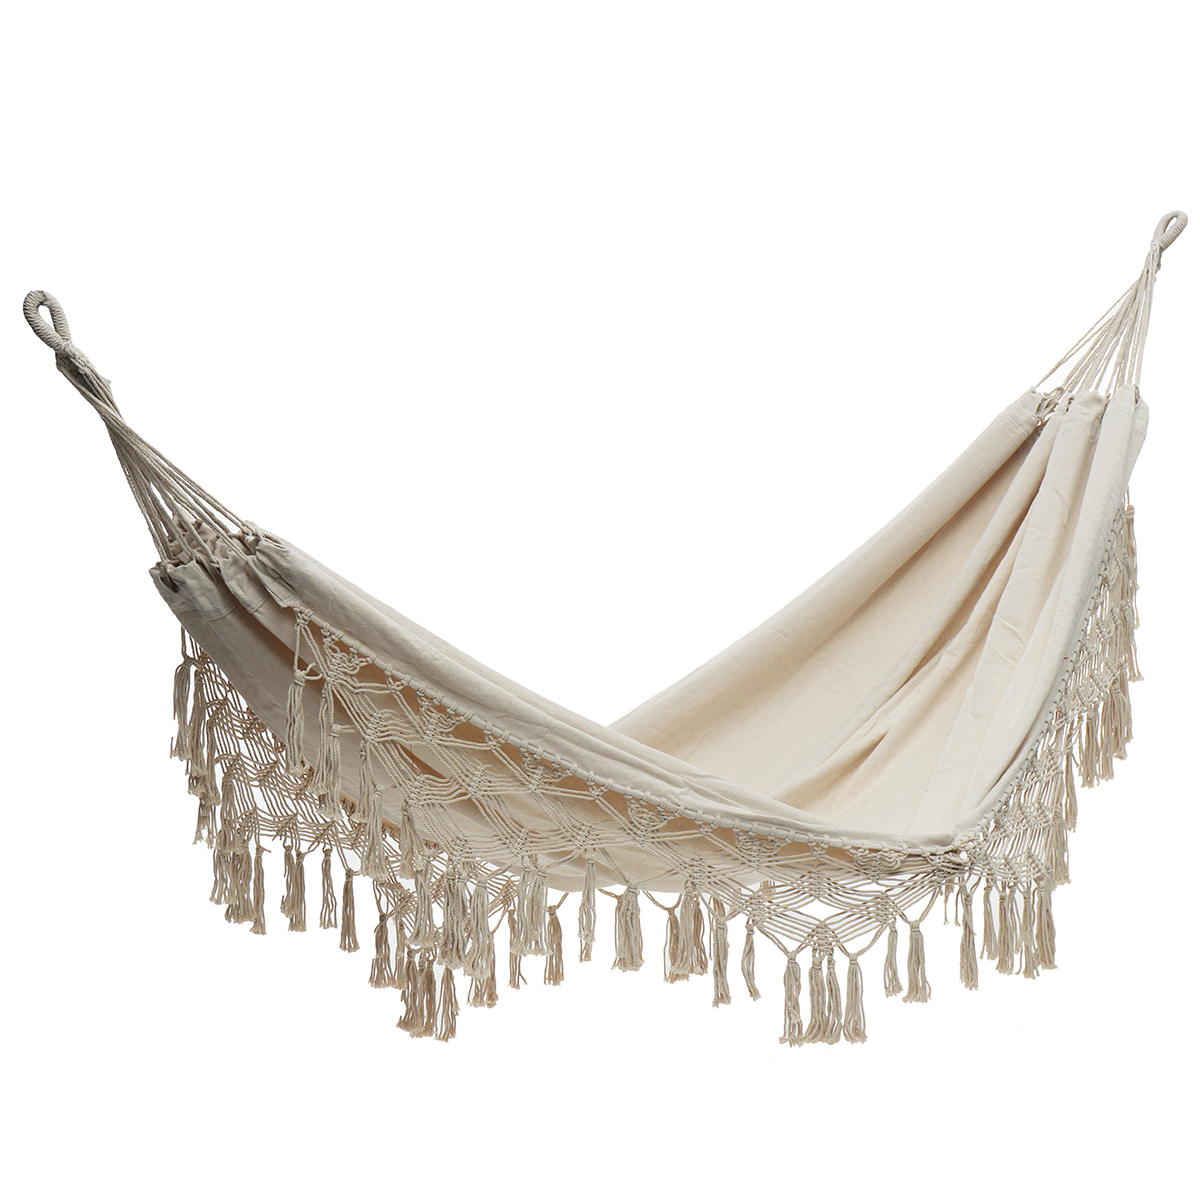 

320x150cm Outdoor Tassels Double Hammock Garden Patio Beach Cotton Swing Chair Hanging Bed Camping Travel Max Laod 150kg